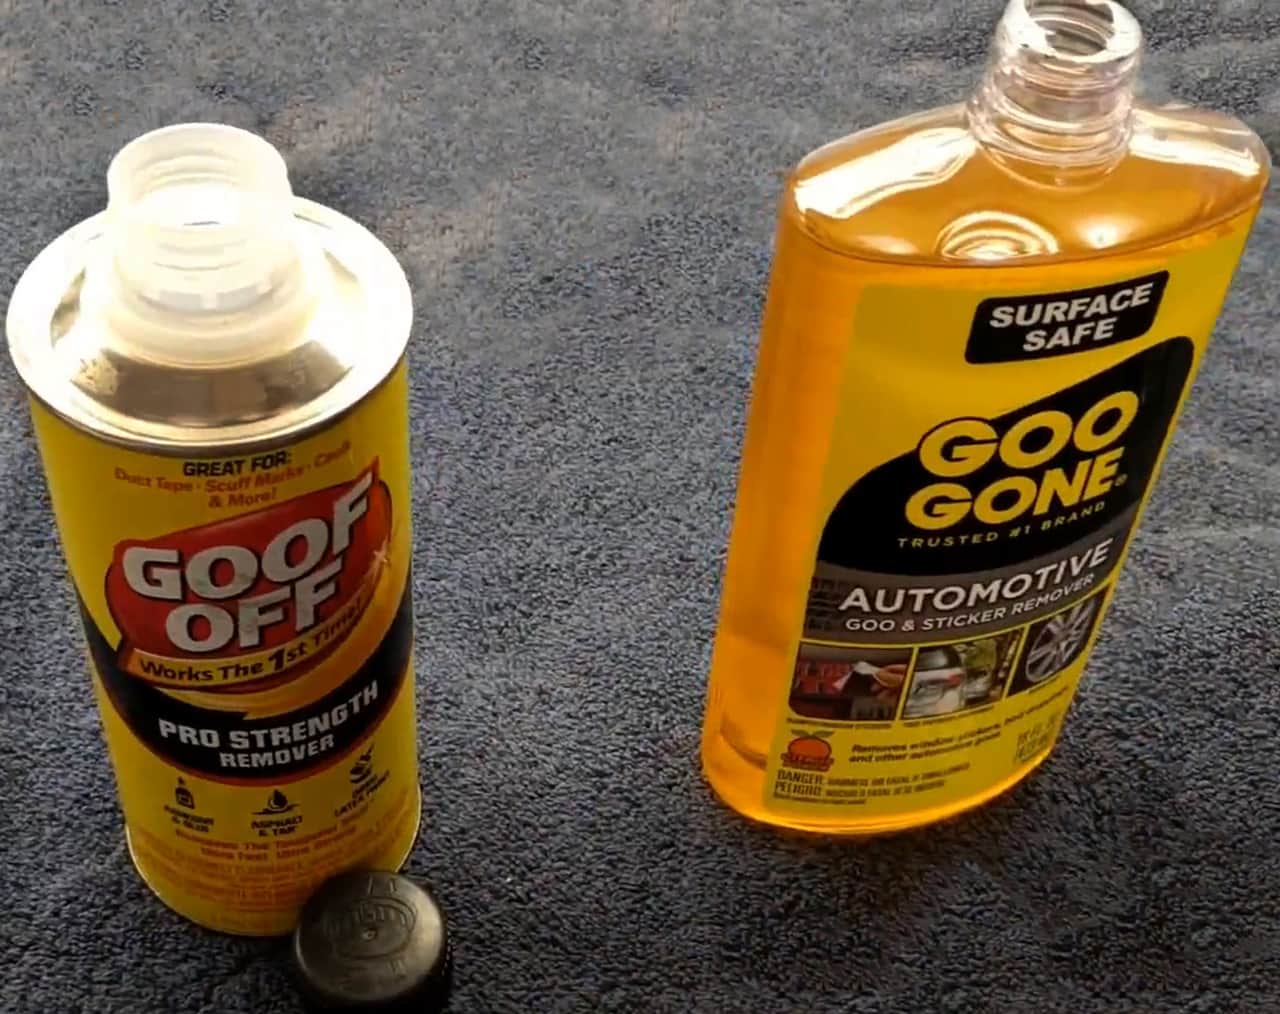 Goo Gone vs. Goof Off (What's the Difference?) - Prudent Reviews